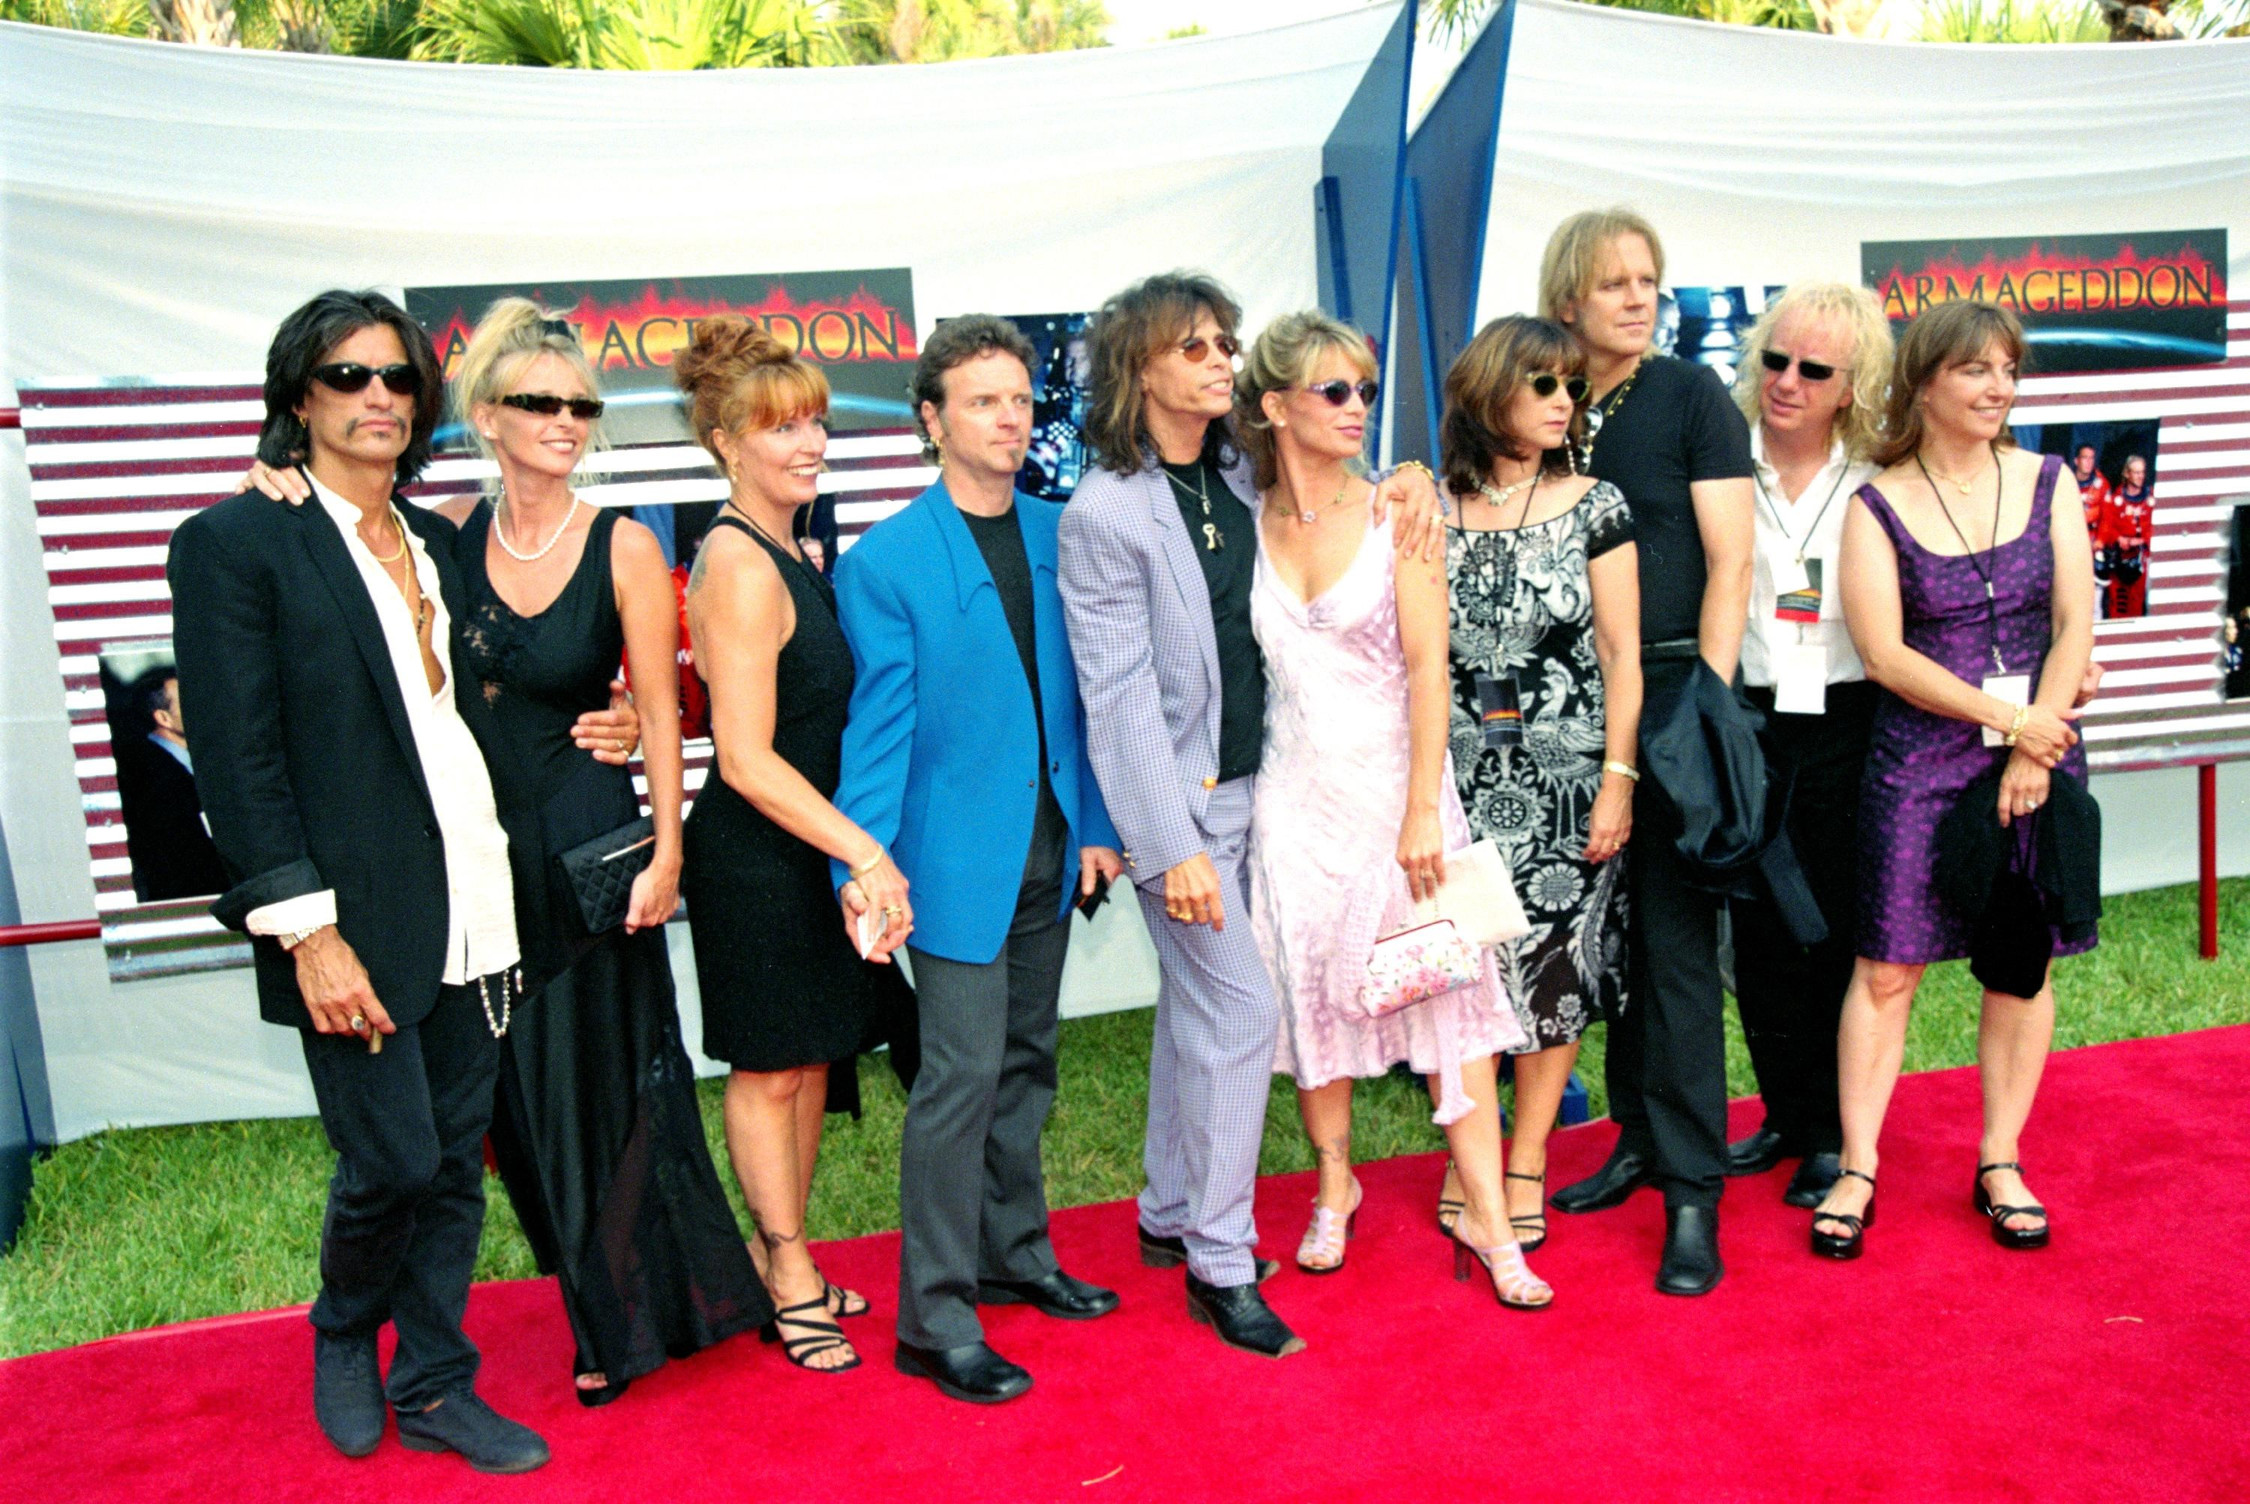 Aerosmith and Guests on red carpet for "Armaggedon